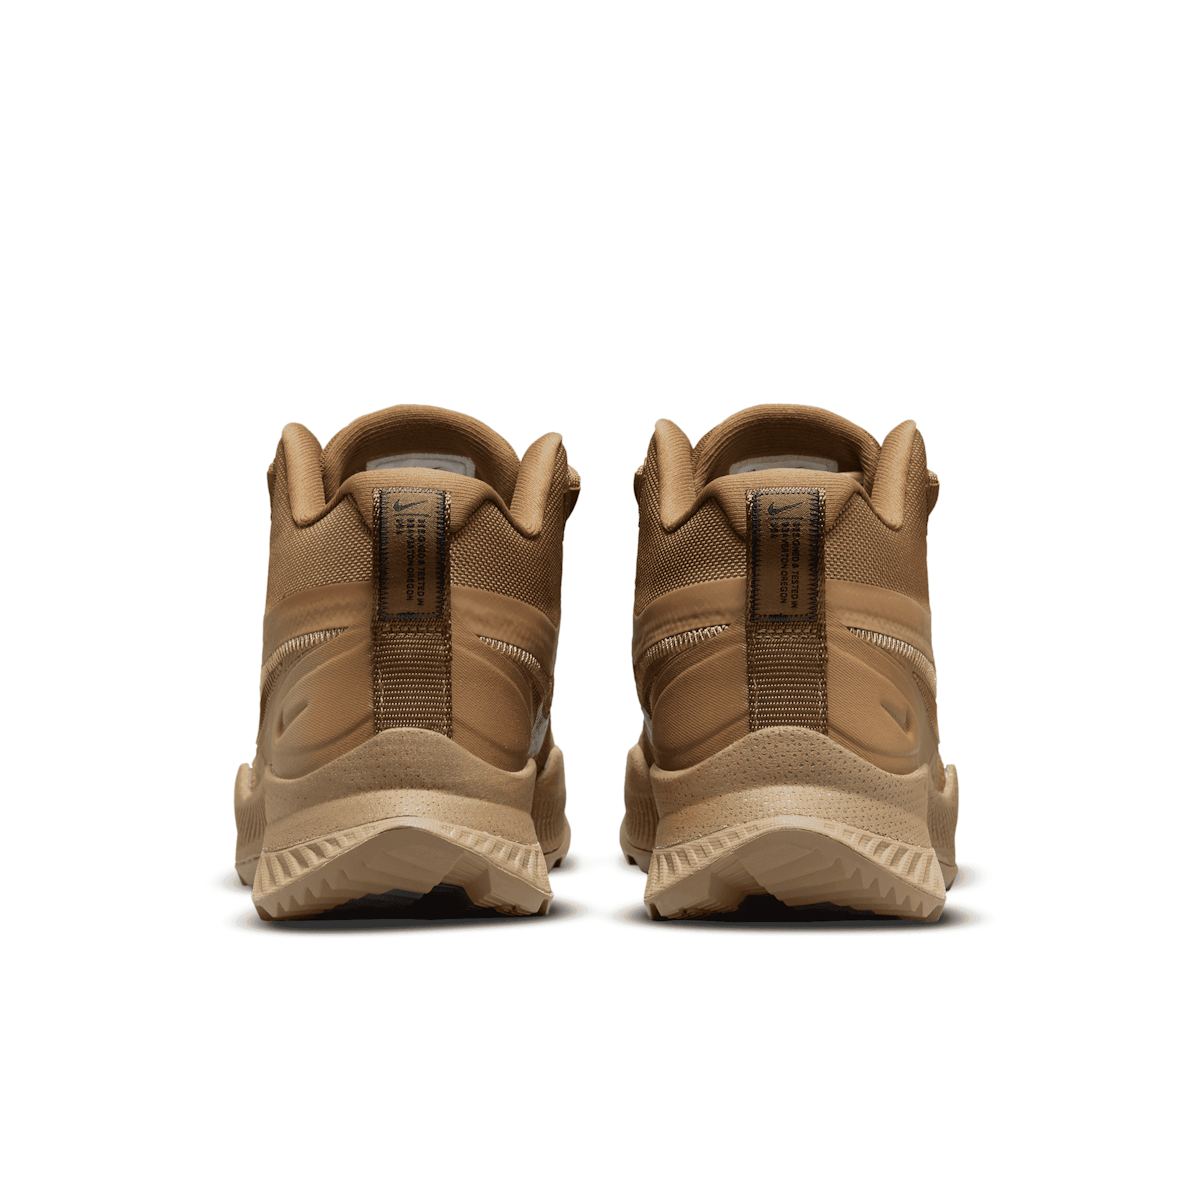 Nike React SFB Carbon High Coyote (Wide) - CK9951-900 Raffles and